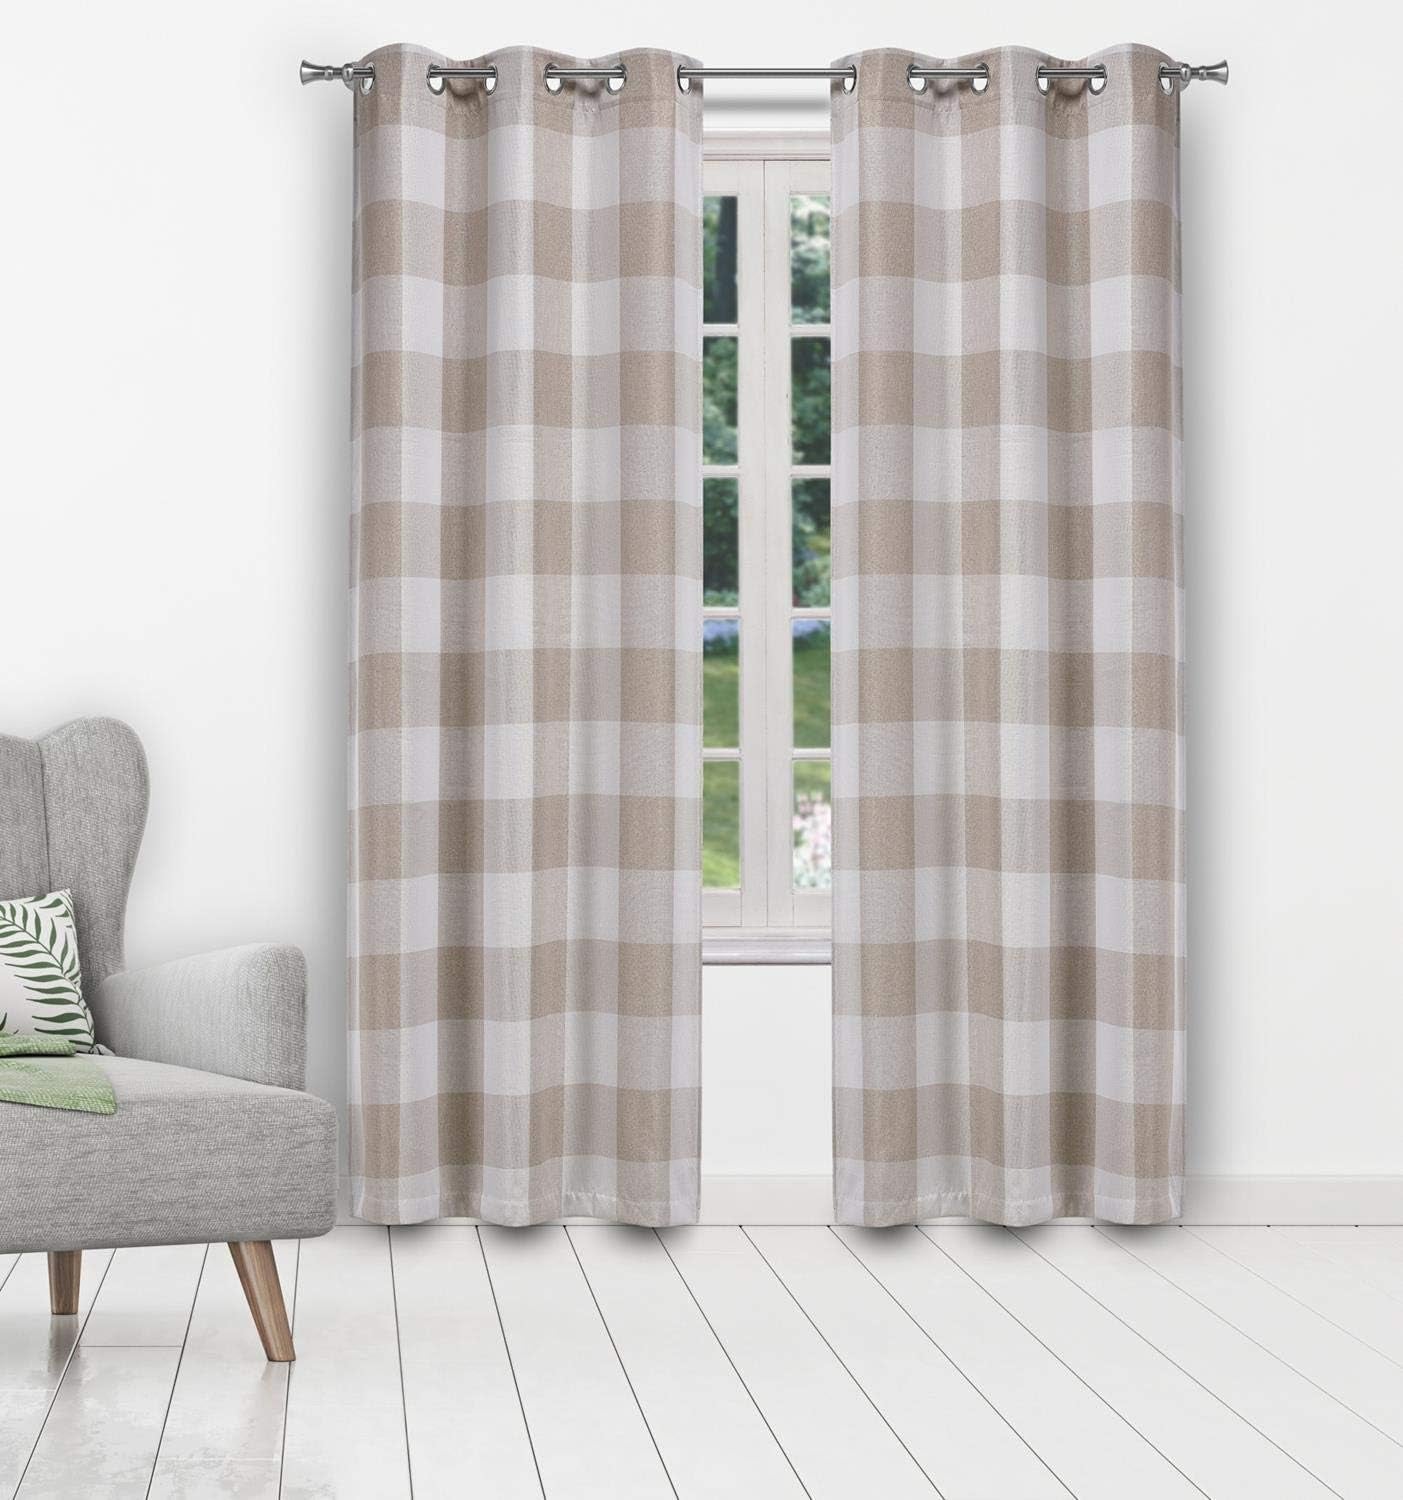 Blackout 365 Aaron Checkered Set Buffalo Plaid Blackout Bedroom-Insulated and Energy Efficient Rod Pocket Window Curtains for Living Room, 37 in X 84 in (W X L), Grey  Blackout 365 Linen 37 In X 96 In (W X L) 